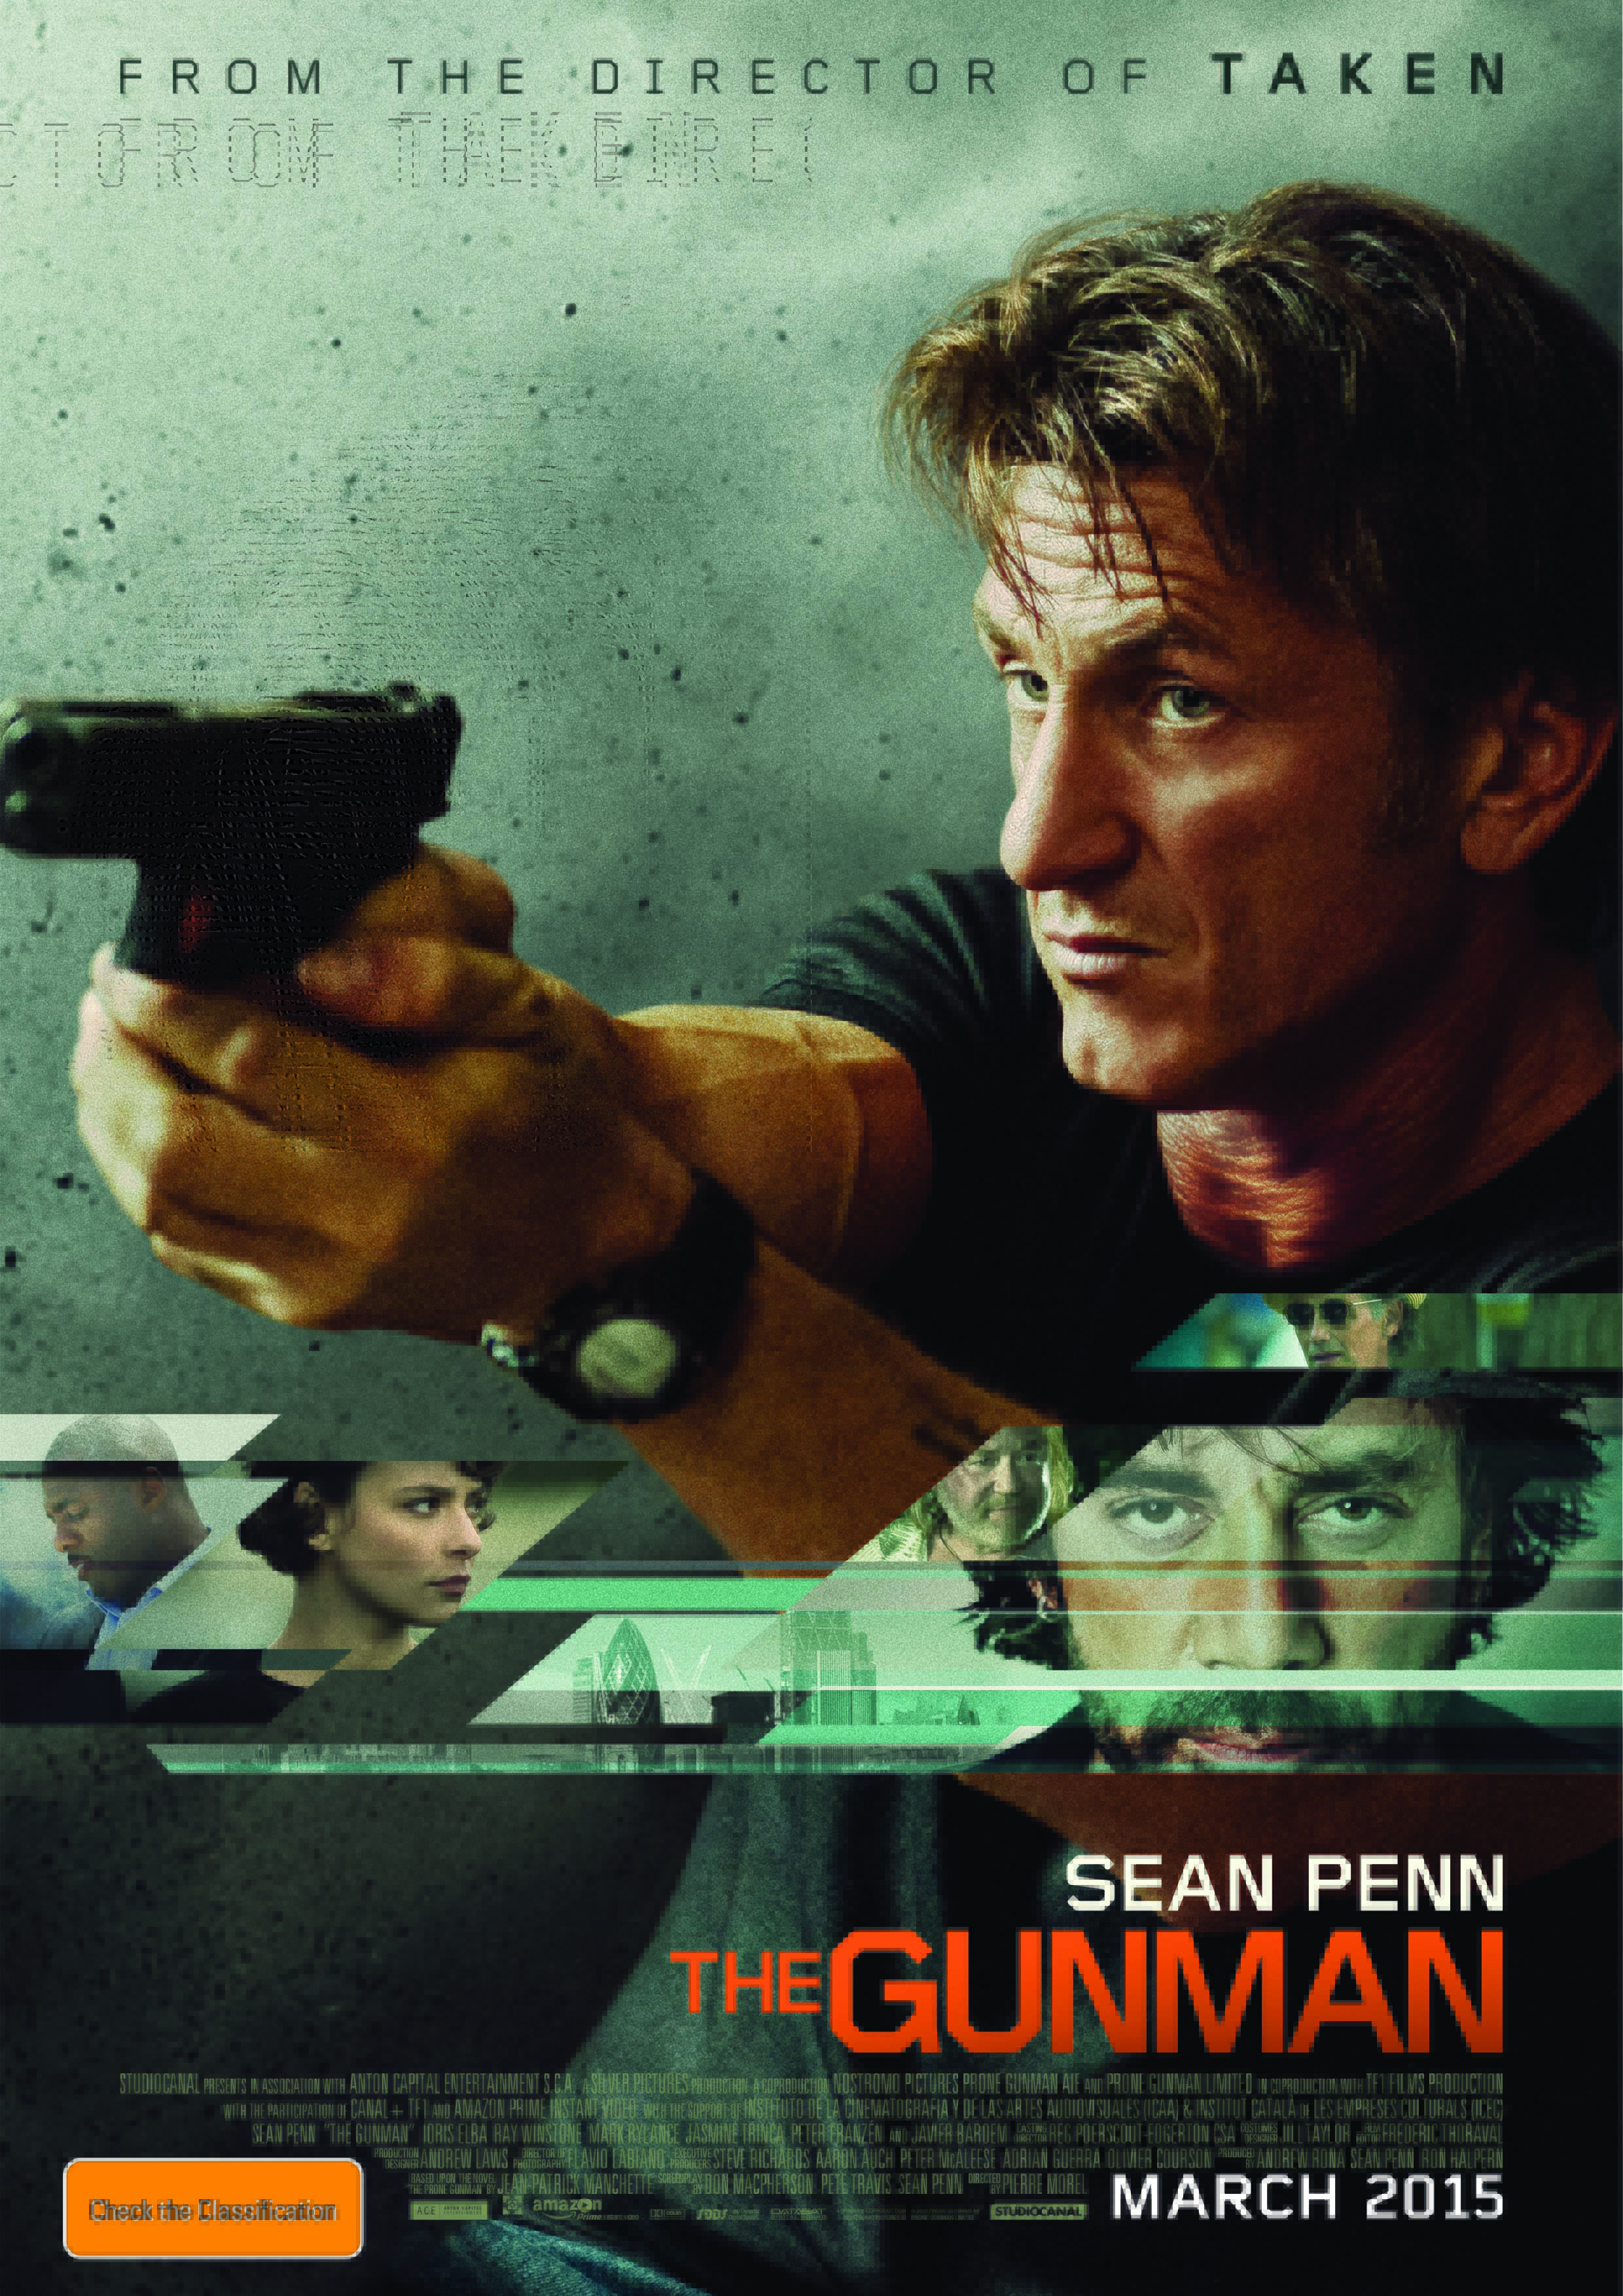 Sean Penn Delivers A More Vulnerable Shoot Em Up Hero In